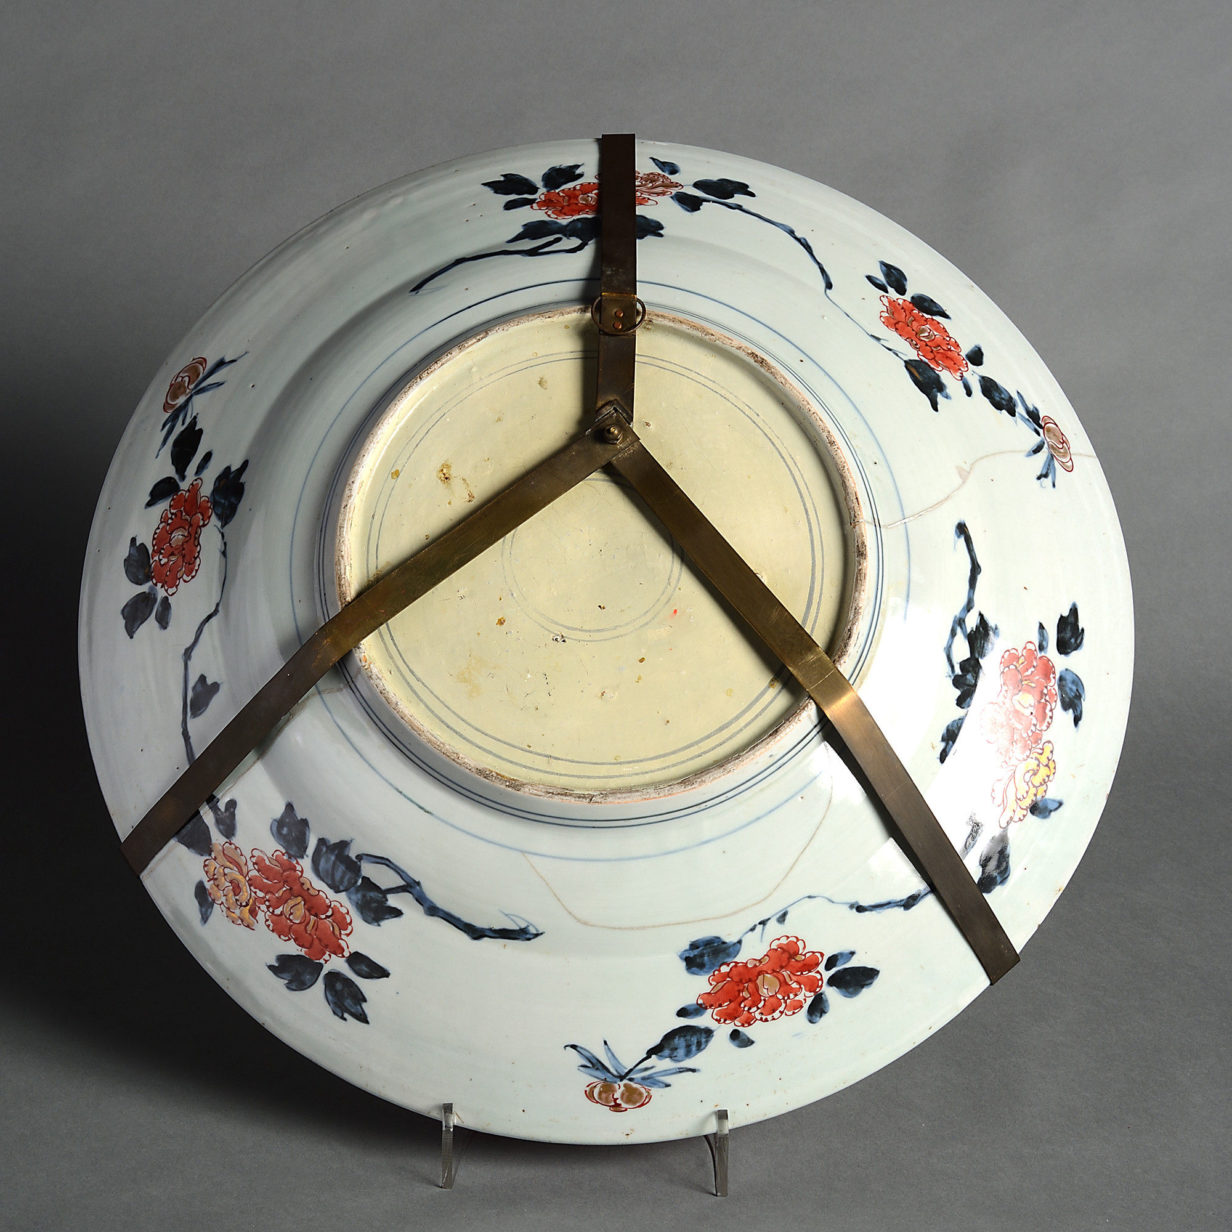 A large 17th century imari porcelain charger